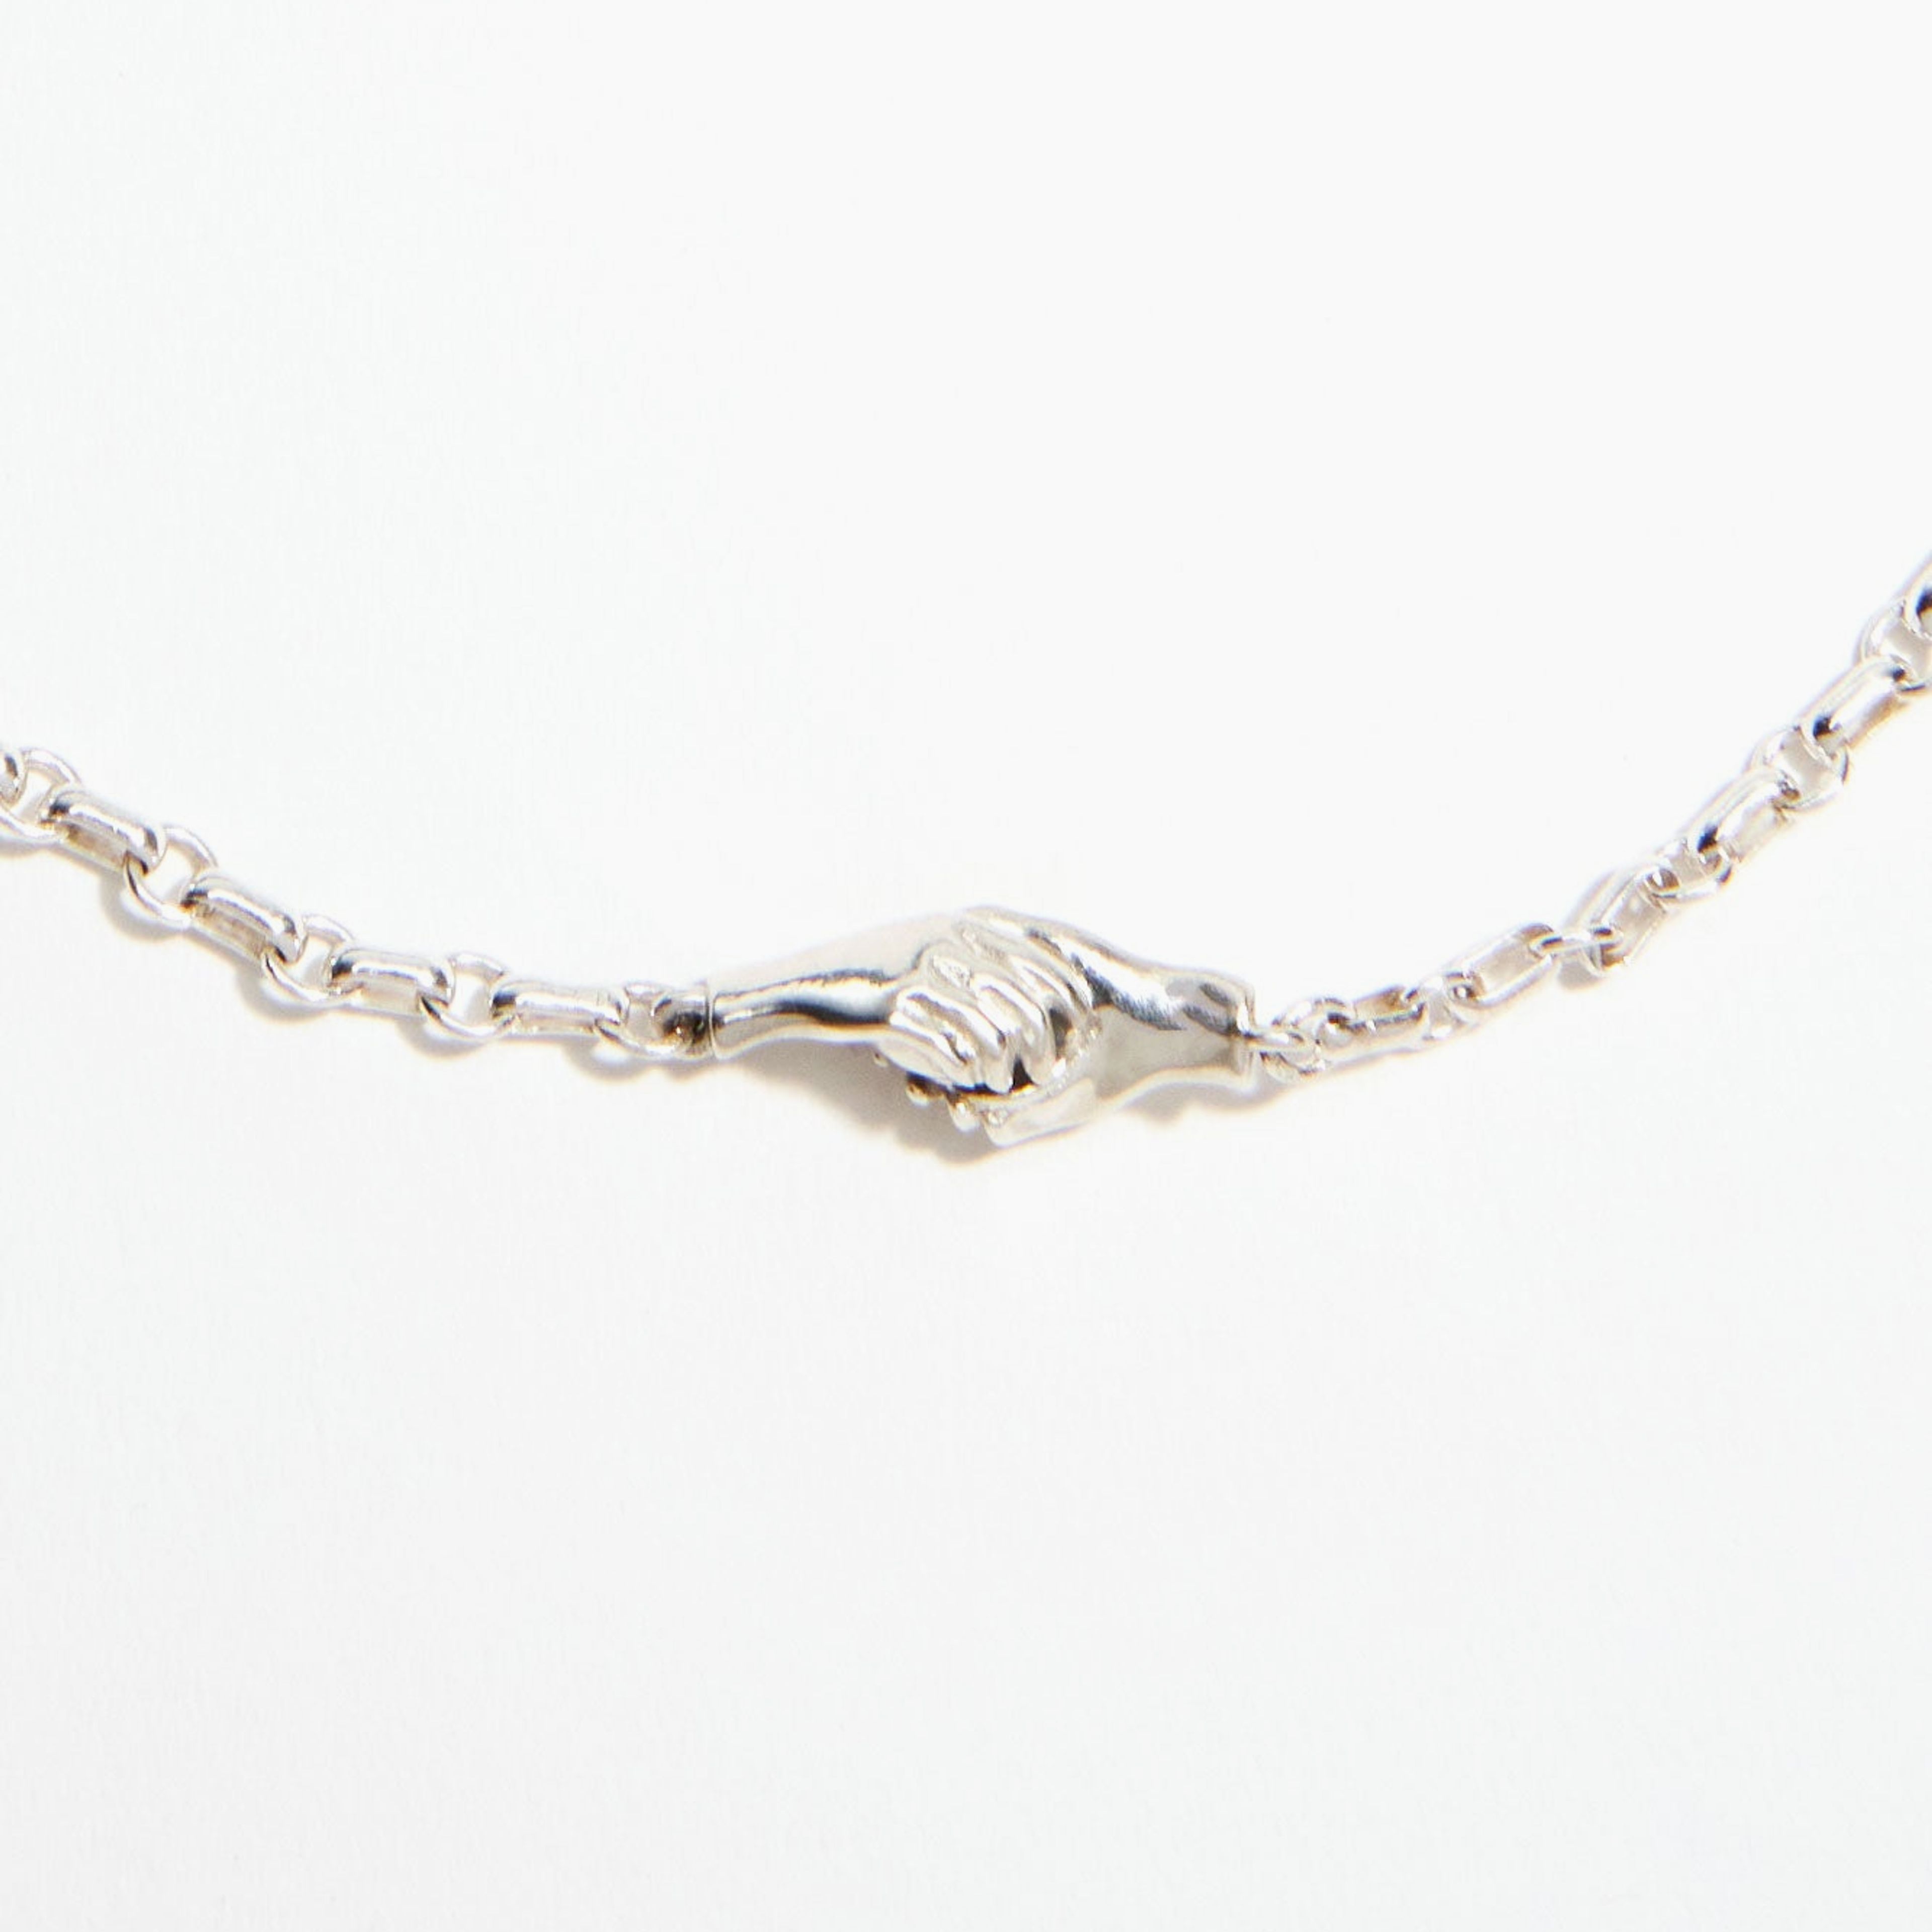 Fine Gentlewoman's Agreement Necklace in Sterling Silver